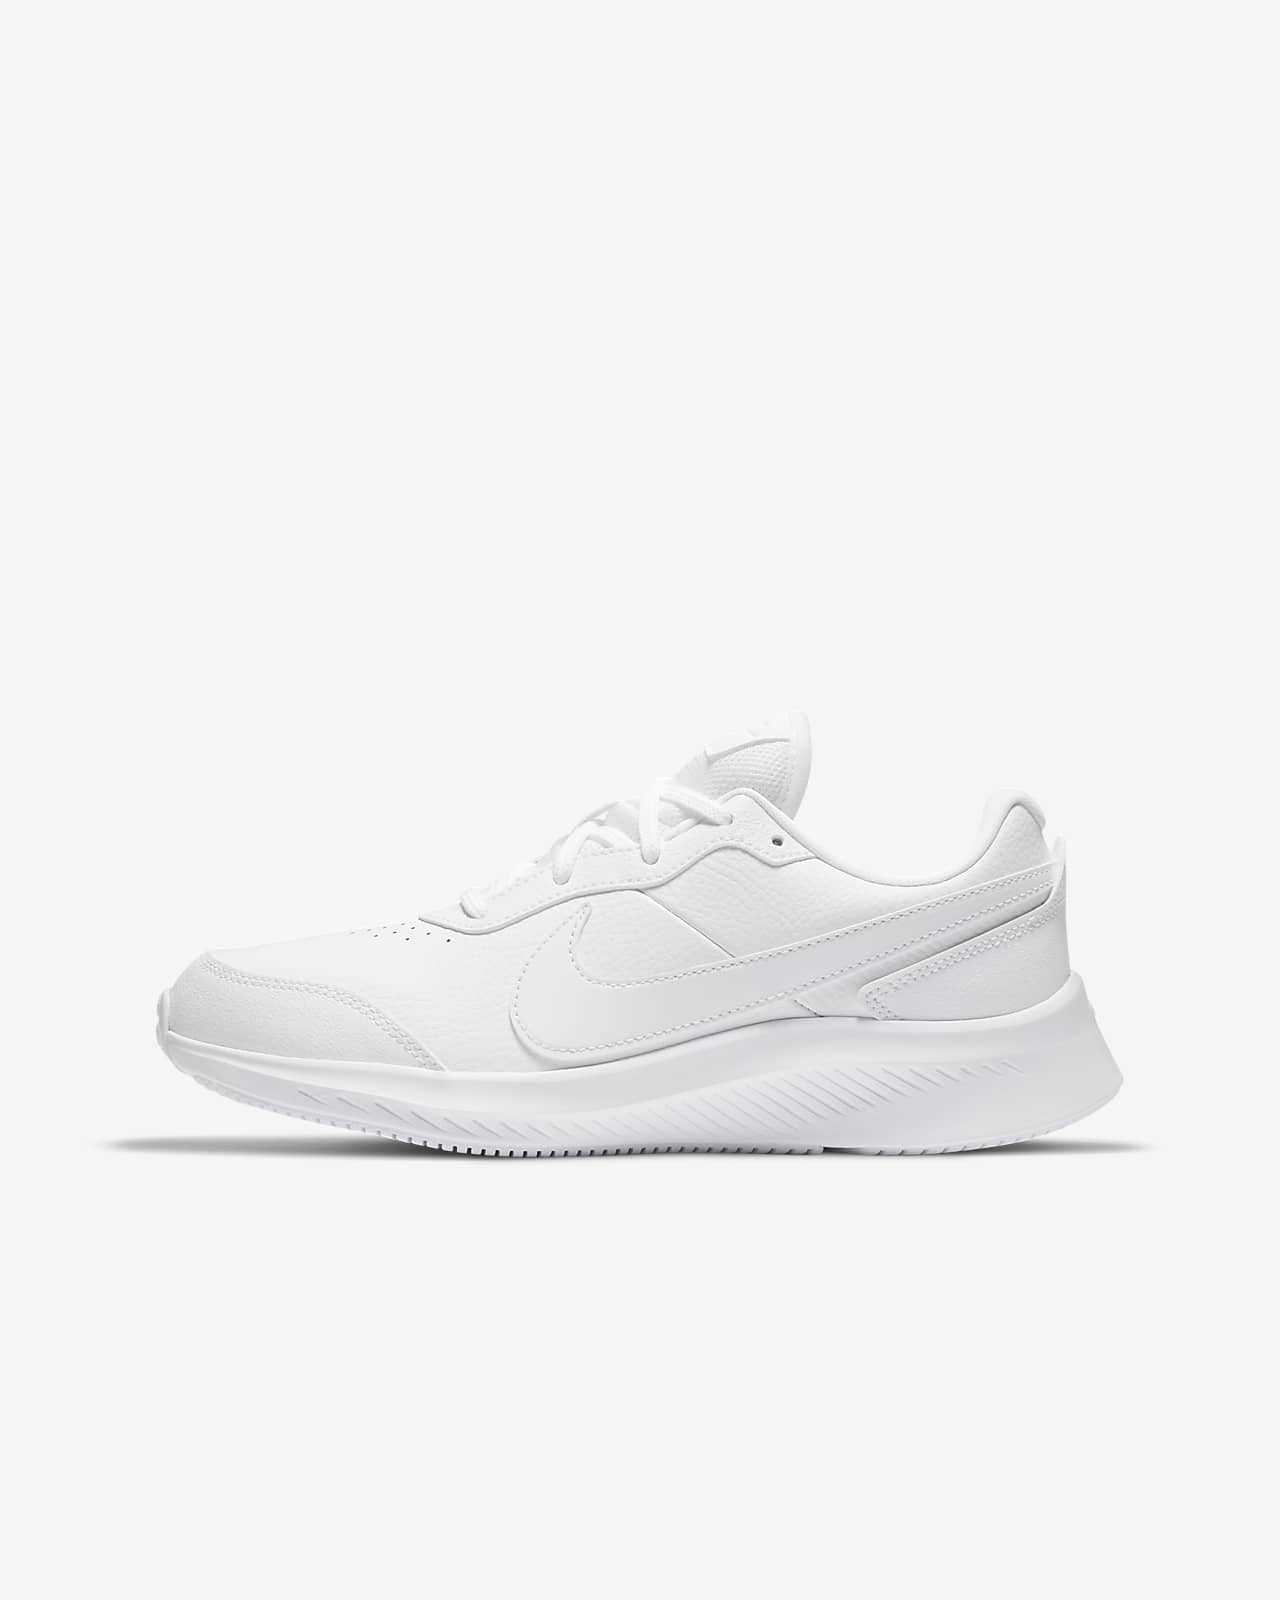 white shoes for boys nike